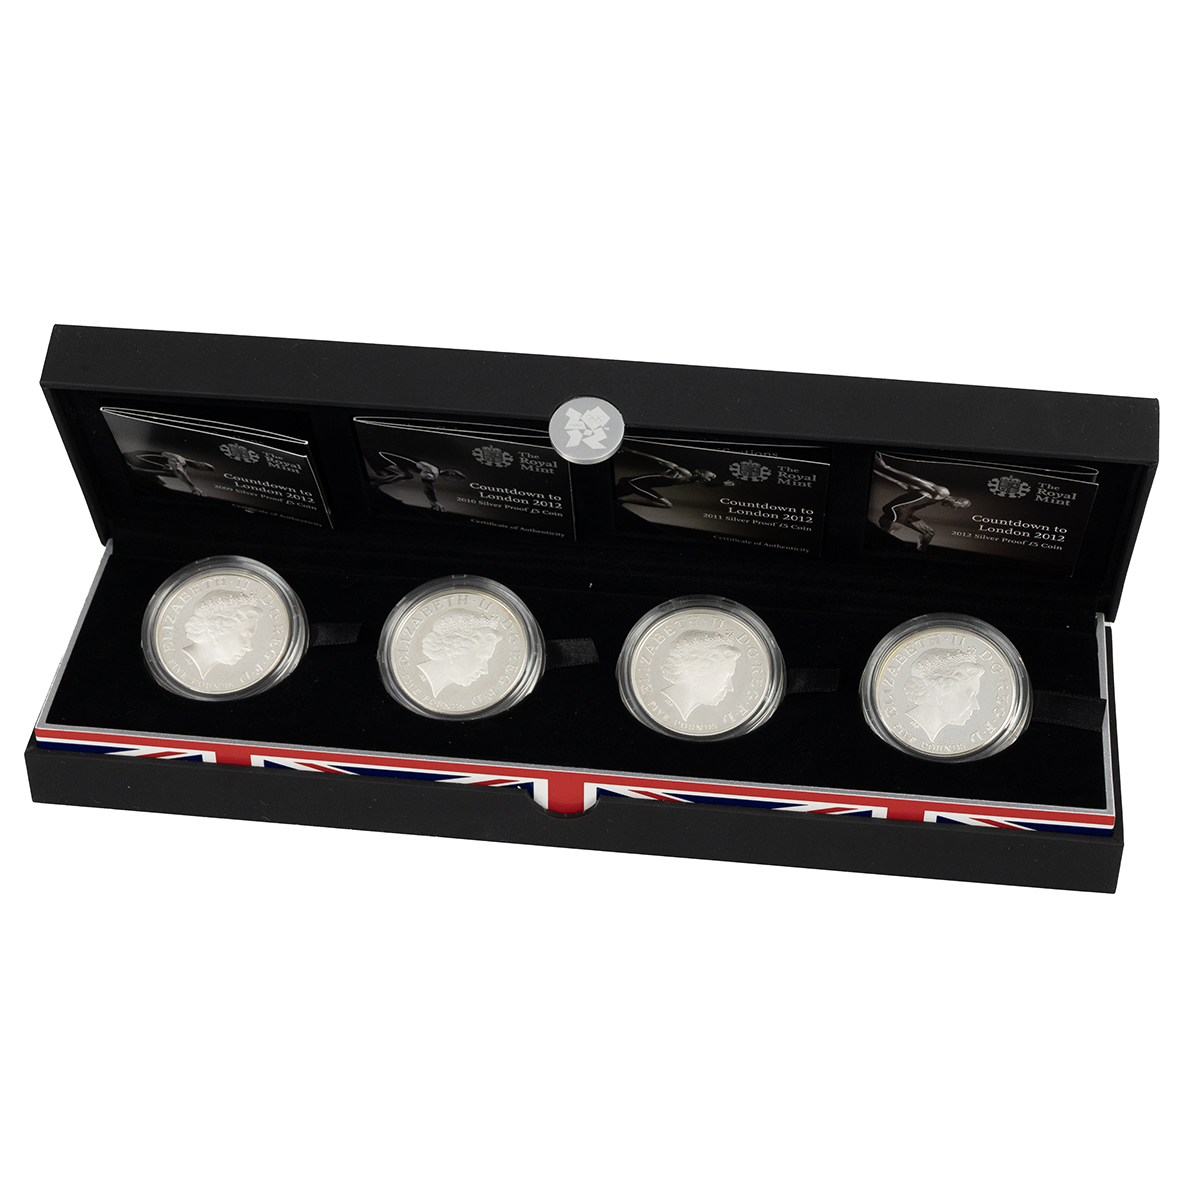 2009-2012 Countdown to London Olympics four-coin silver proof £5 set in Royal Mint box. Includes ... - Image 2 of 3